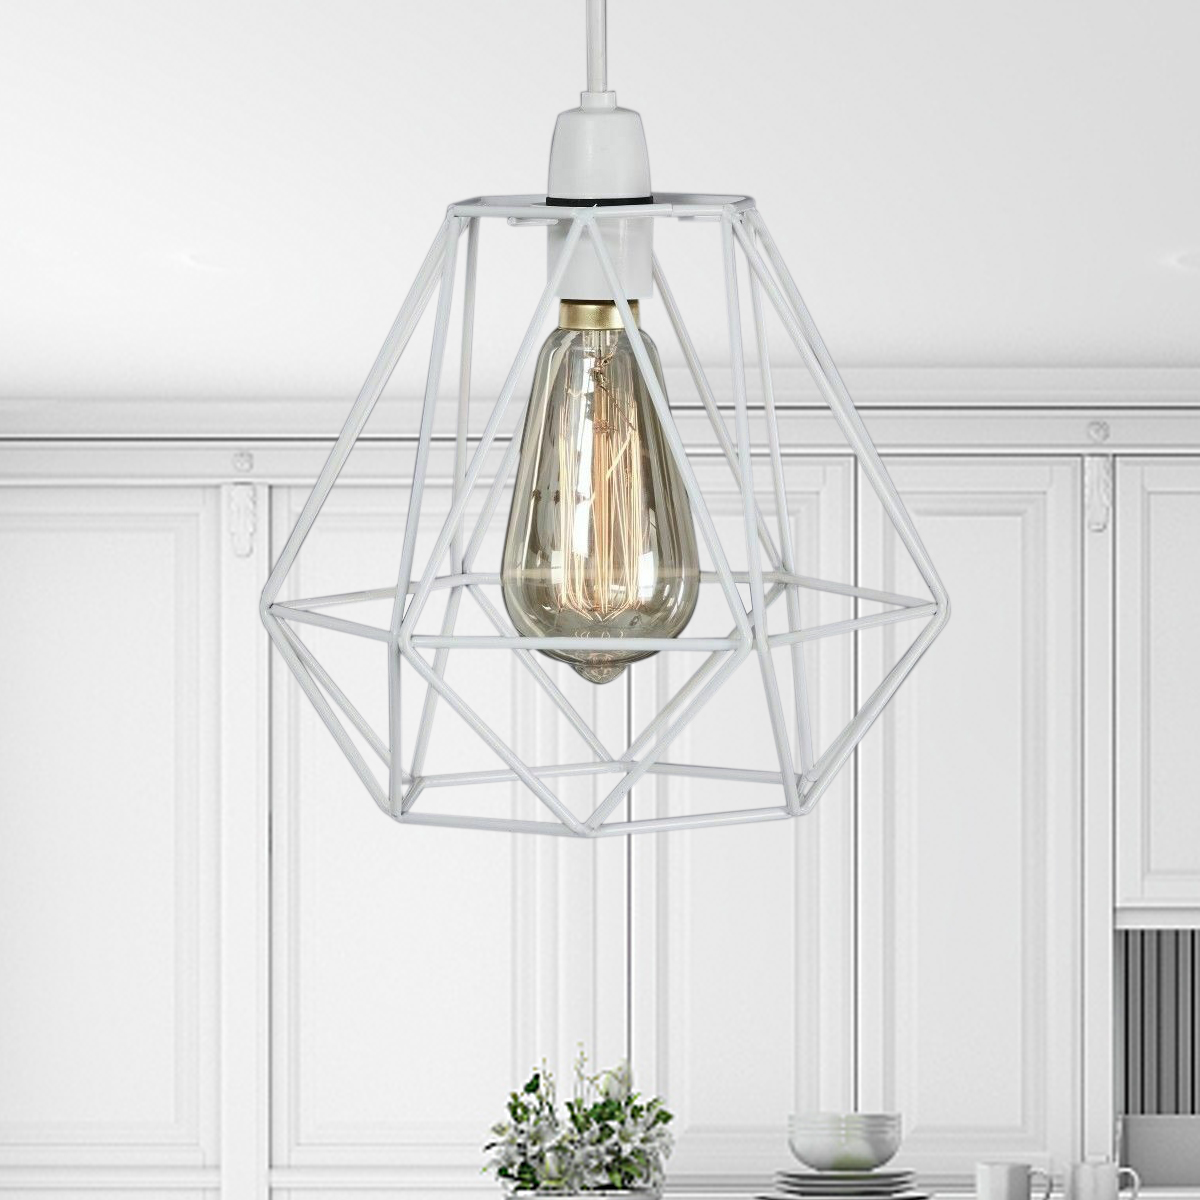 Geometric-Wire-Ceiling-Pendant-Light-Lampshade-Metal-Cage-Kitchen-Dining-Cafe-Without-Bulb-1758739-4